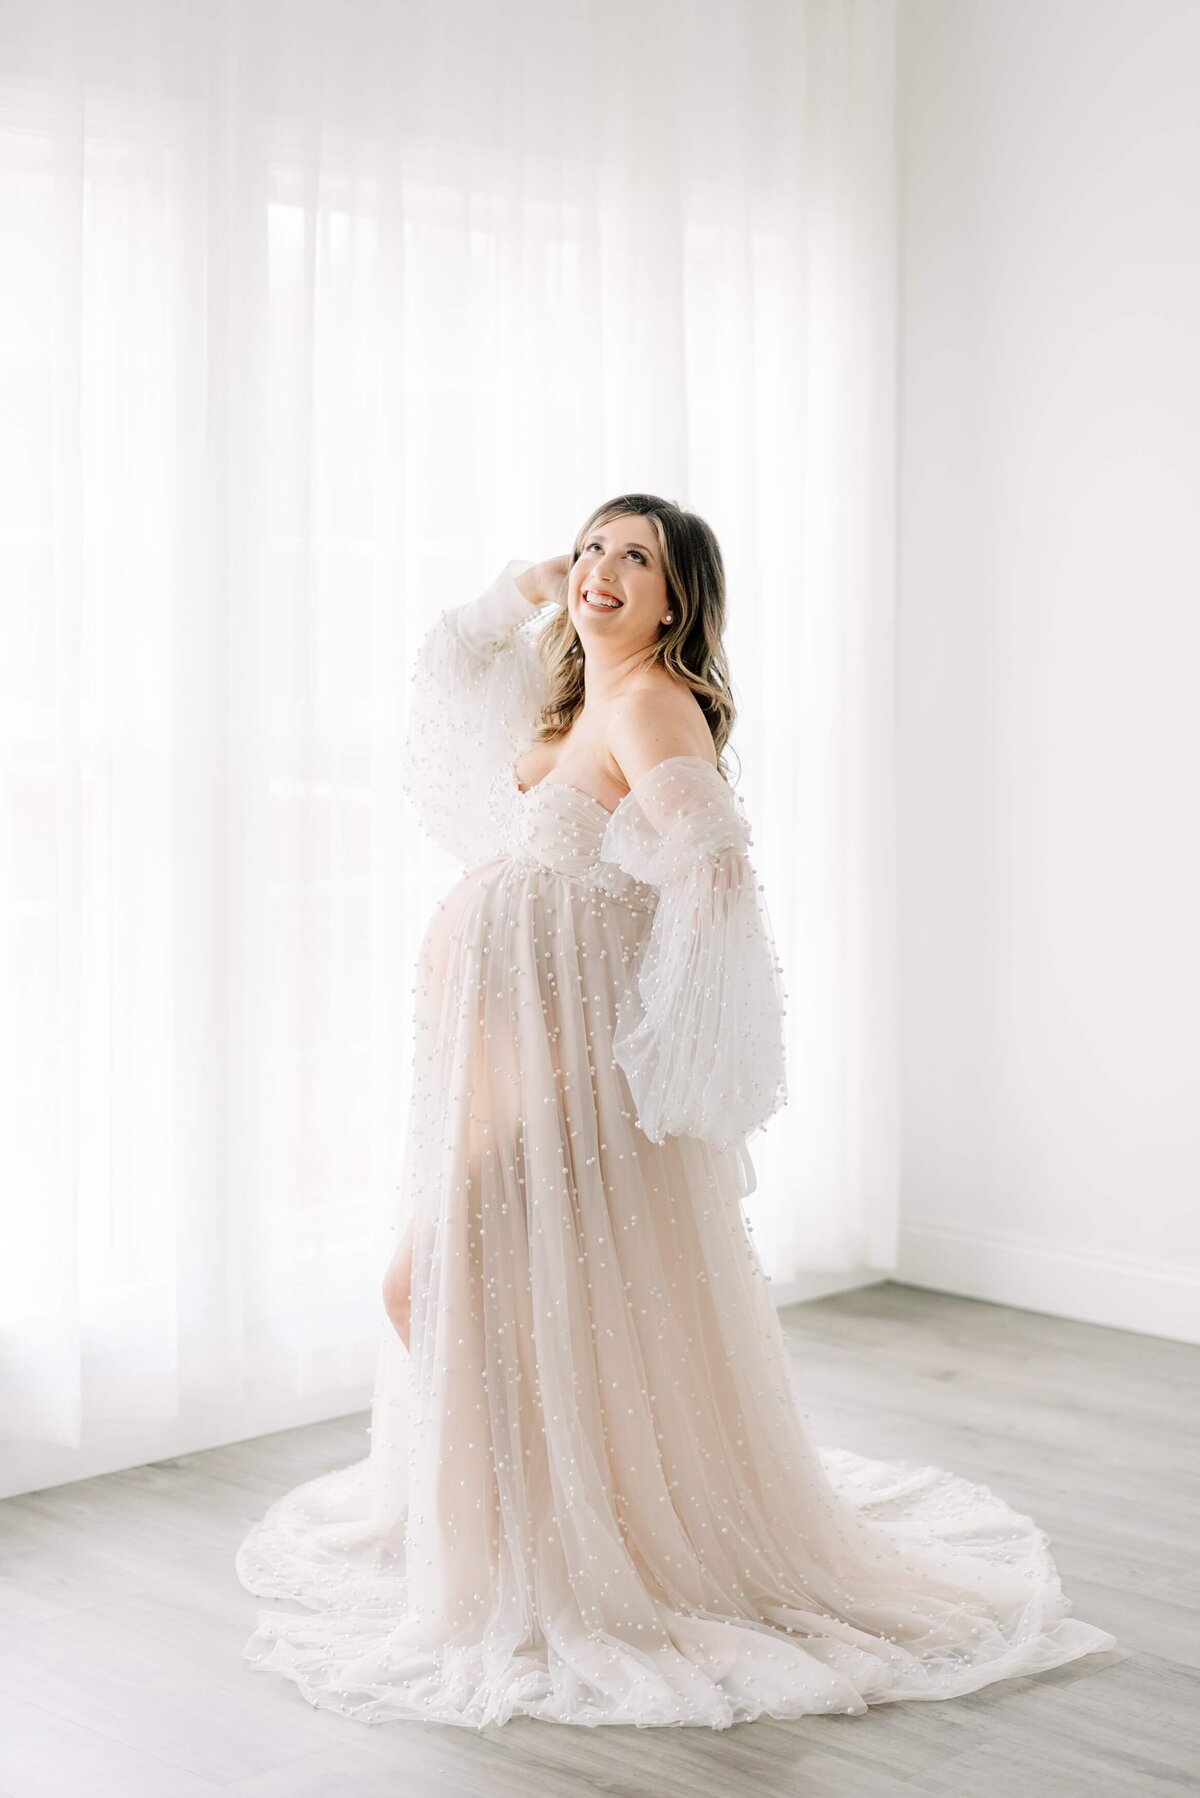 A brunette joyfully poses in  a tulle and pearl maternity gown as she looks up to the ceiling with her hand in her hair.